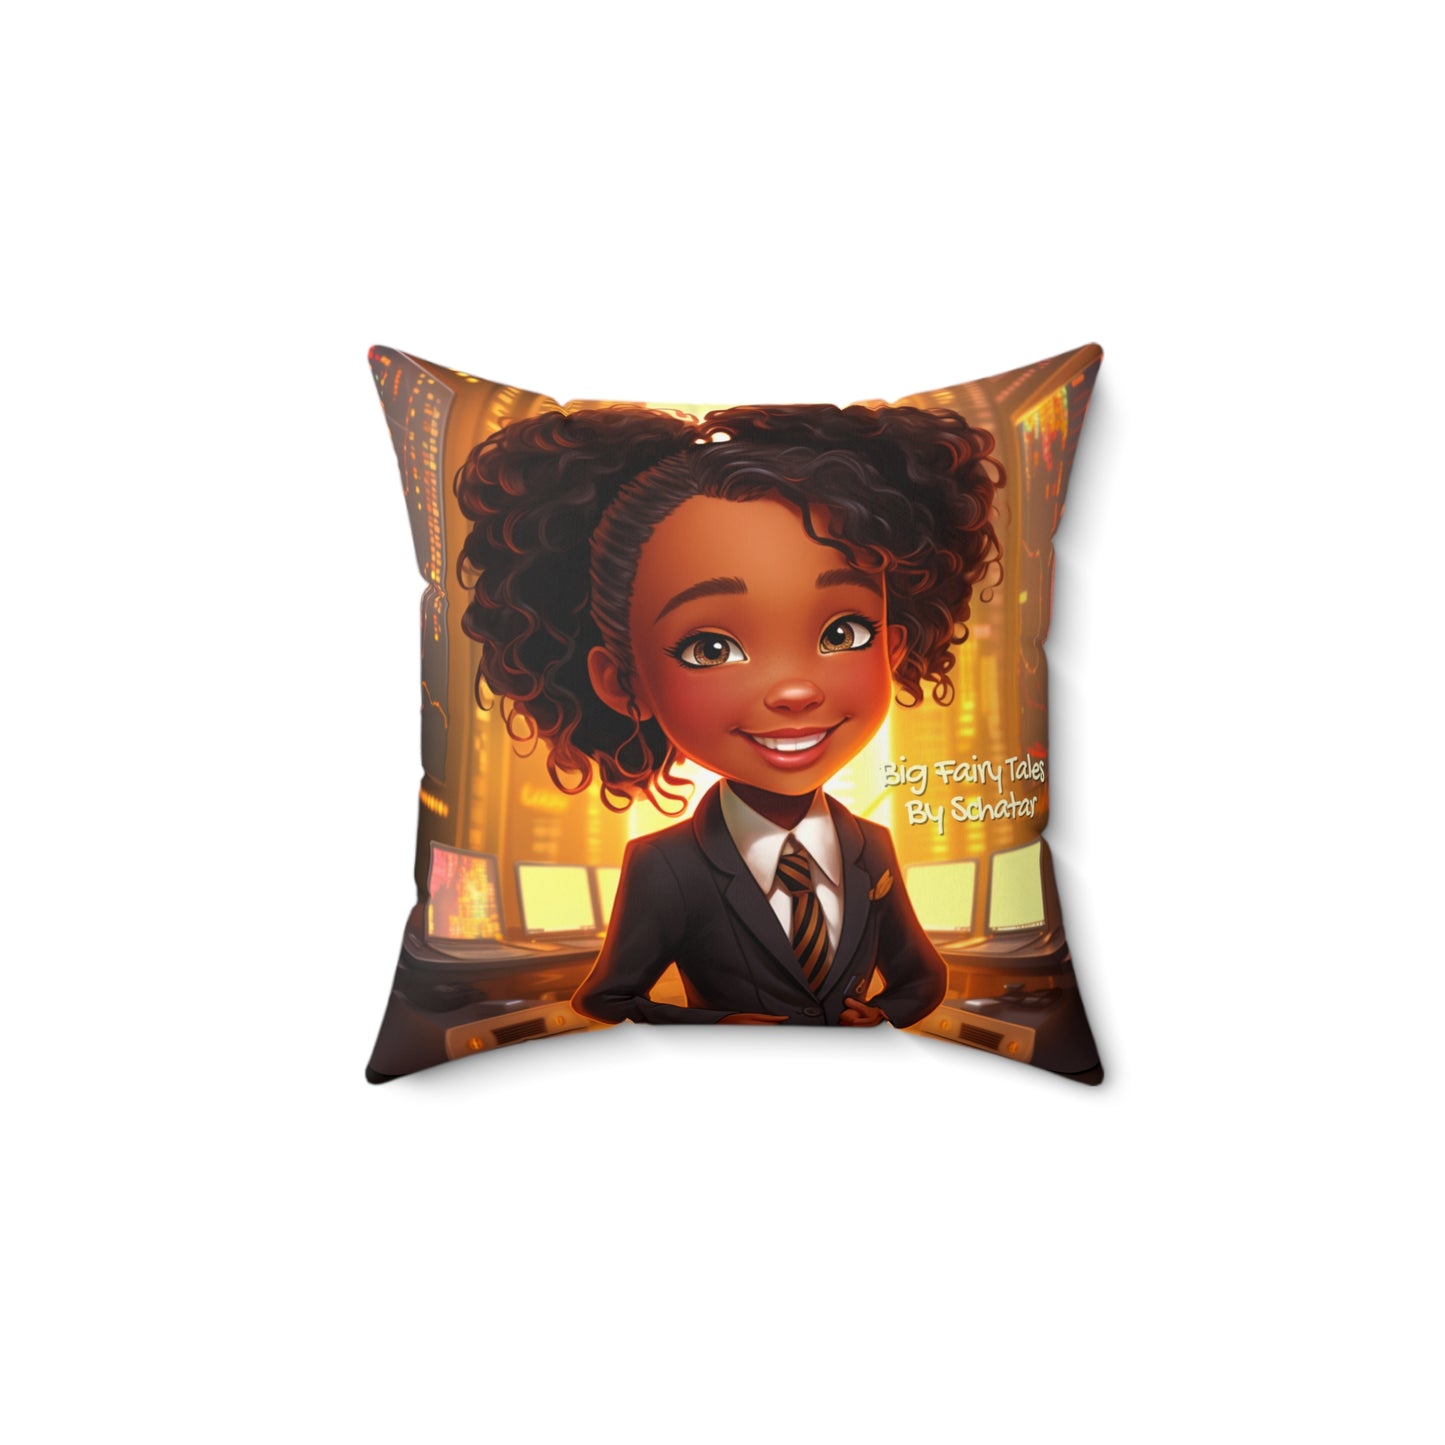 Wall Street Executive - Big Little Professionals Plush Pillow 12 From Big Fairy Tales By Schatar